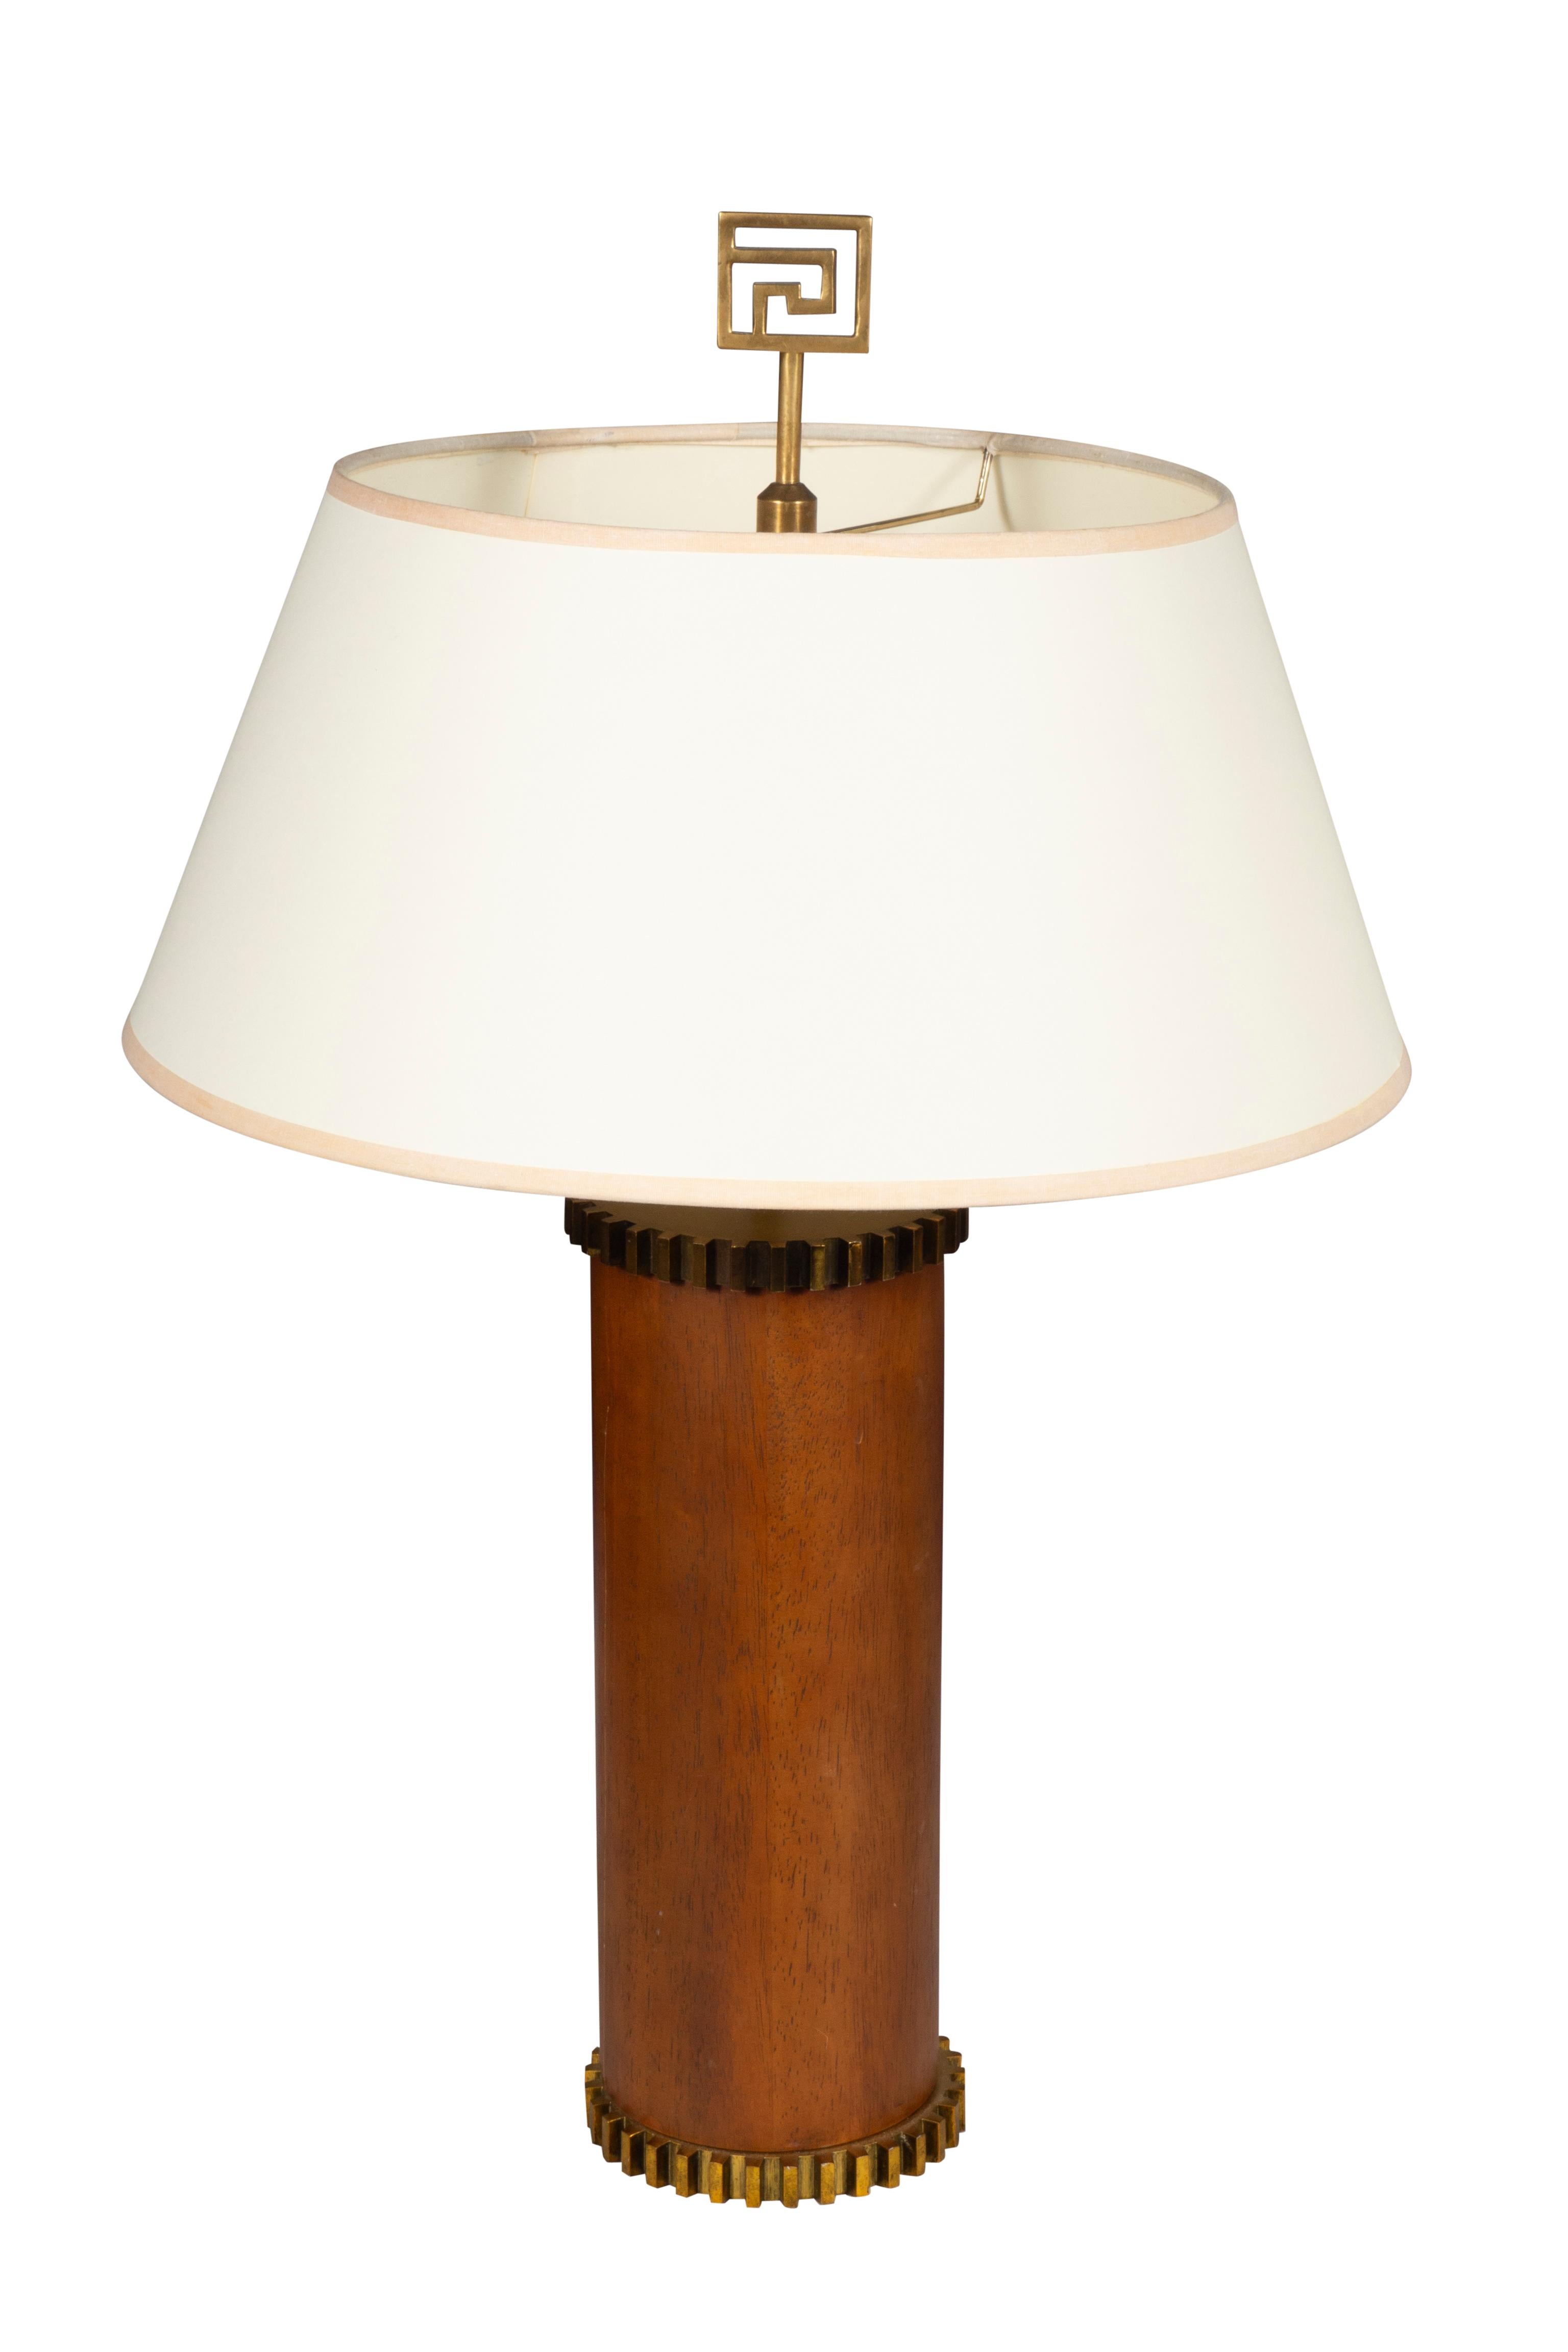 Cylindrical with brass cog ends. Single light with shades and finials.